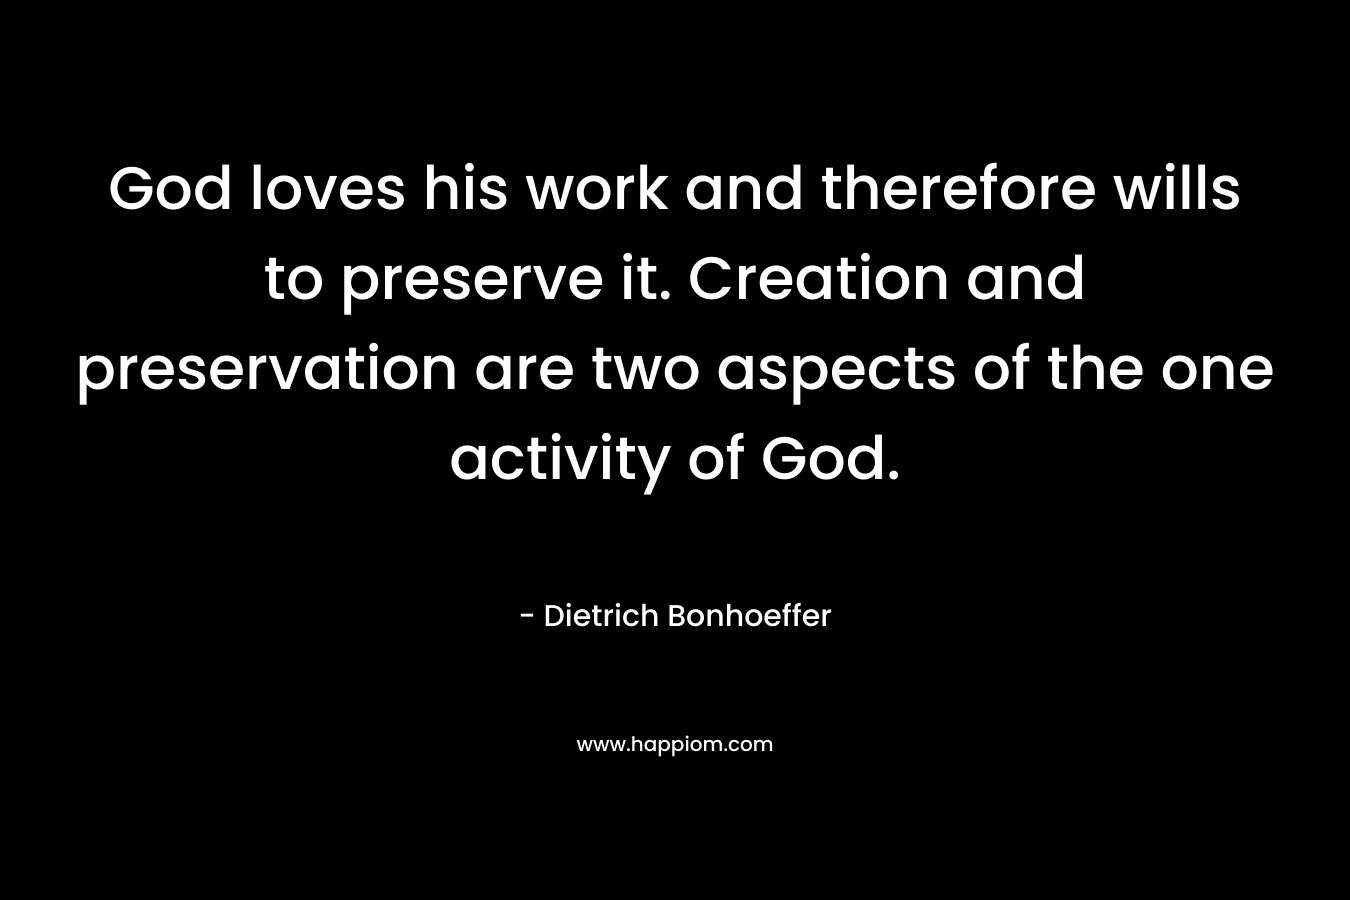 God loves his work and therefore wills to preserve it. Creation and preservation are two aspects of the one activity of God. – Dietrich Bonhoeffer